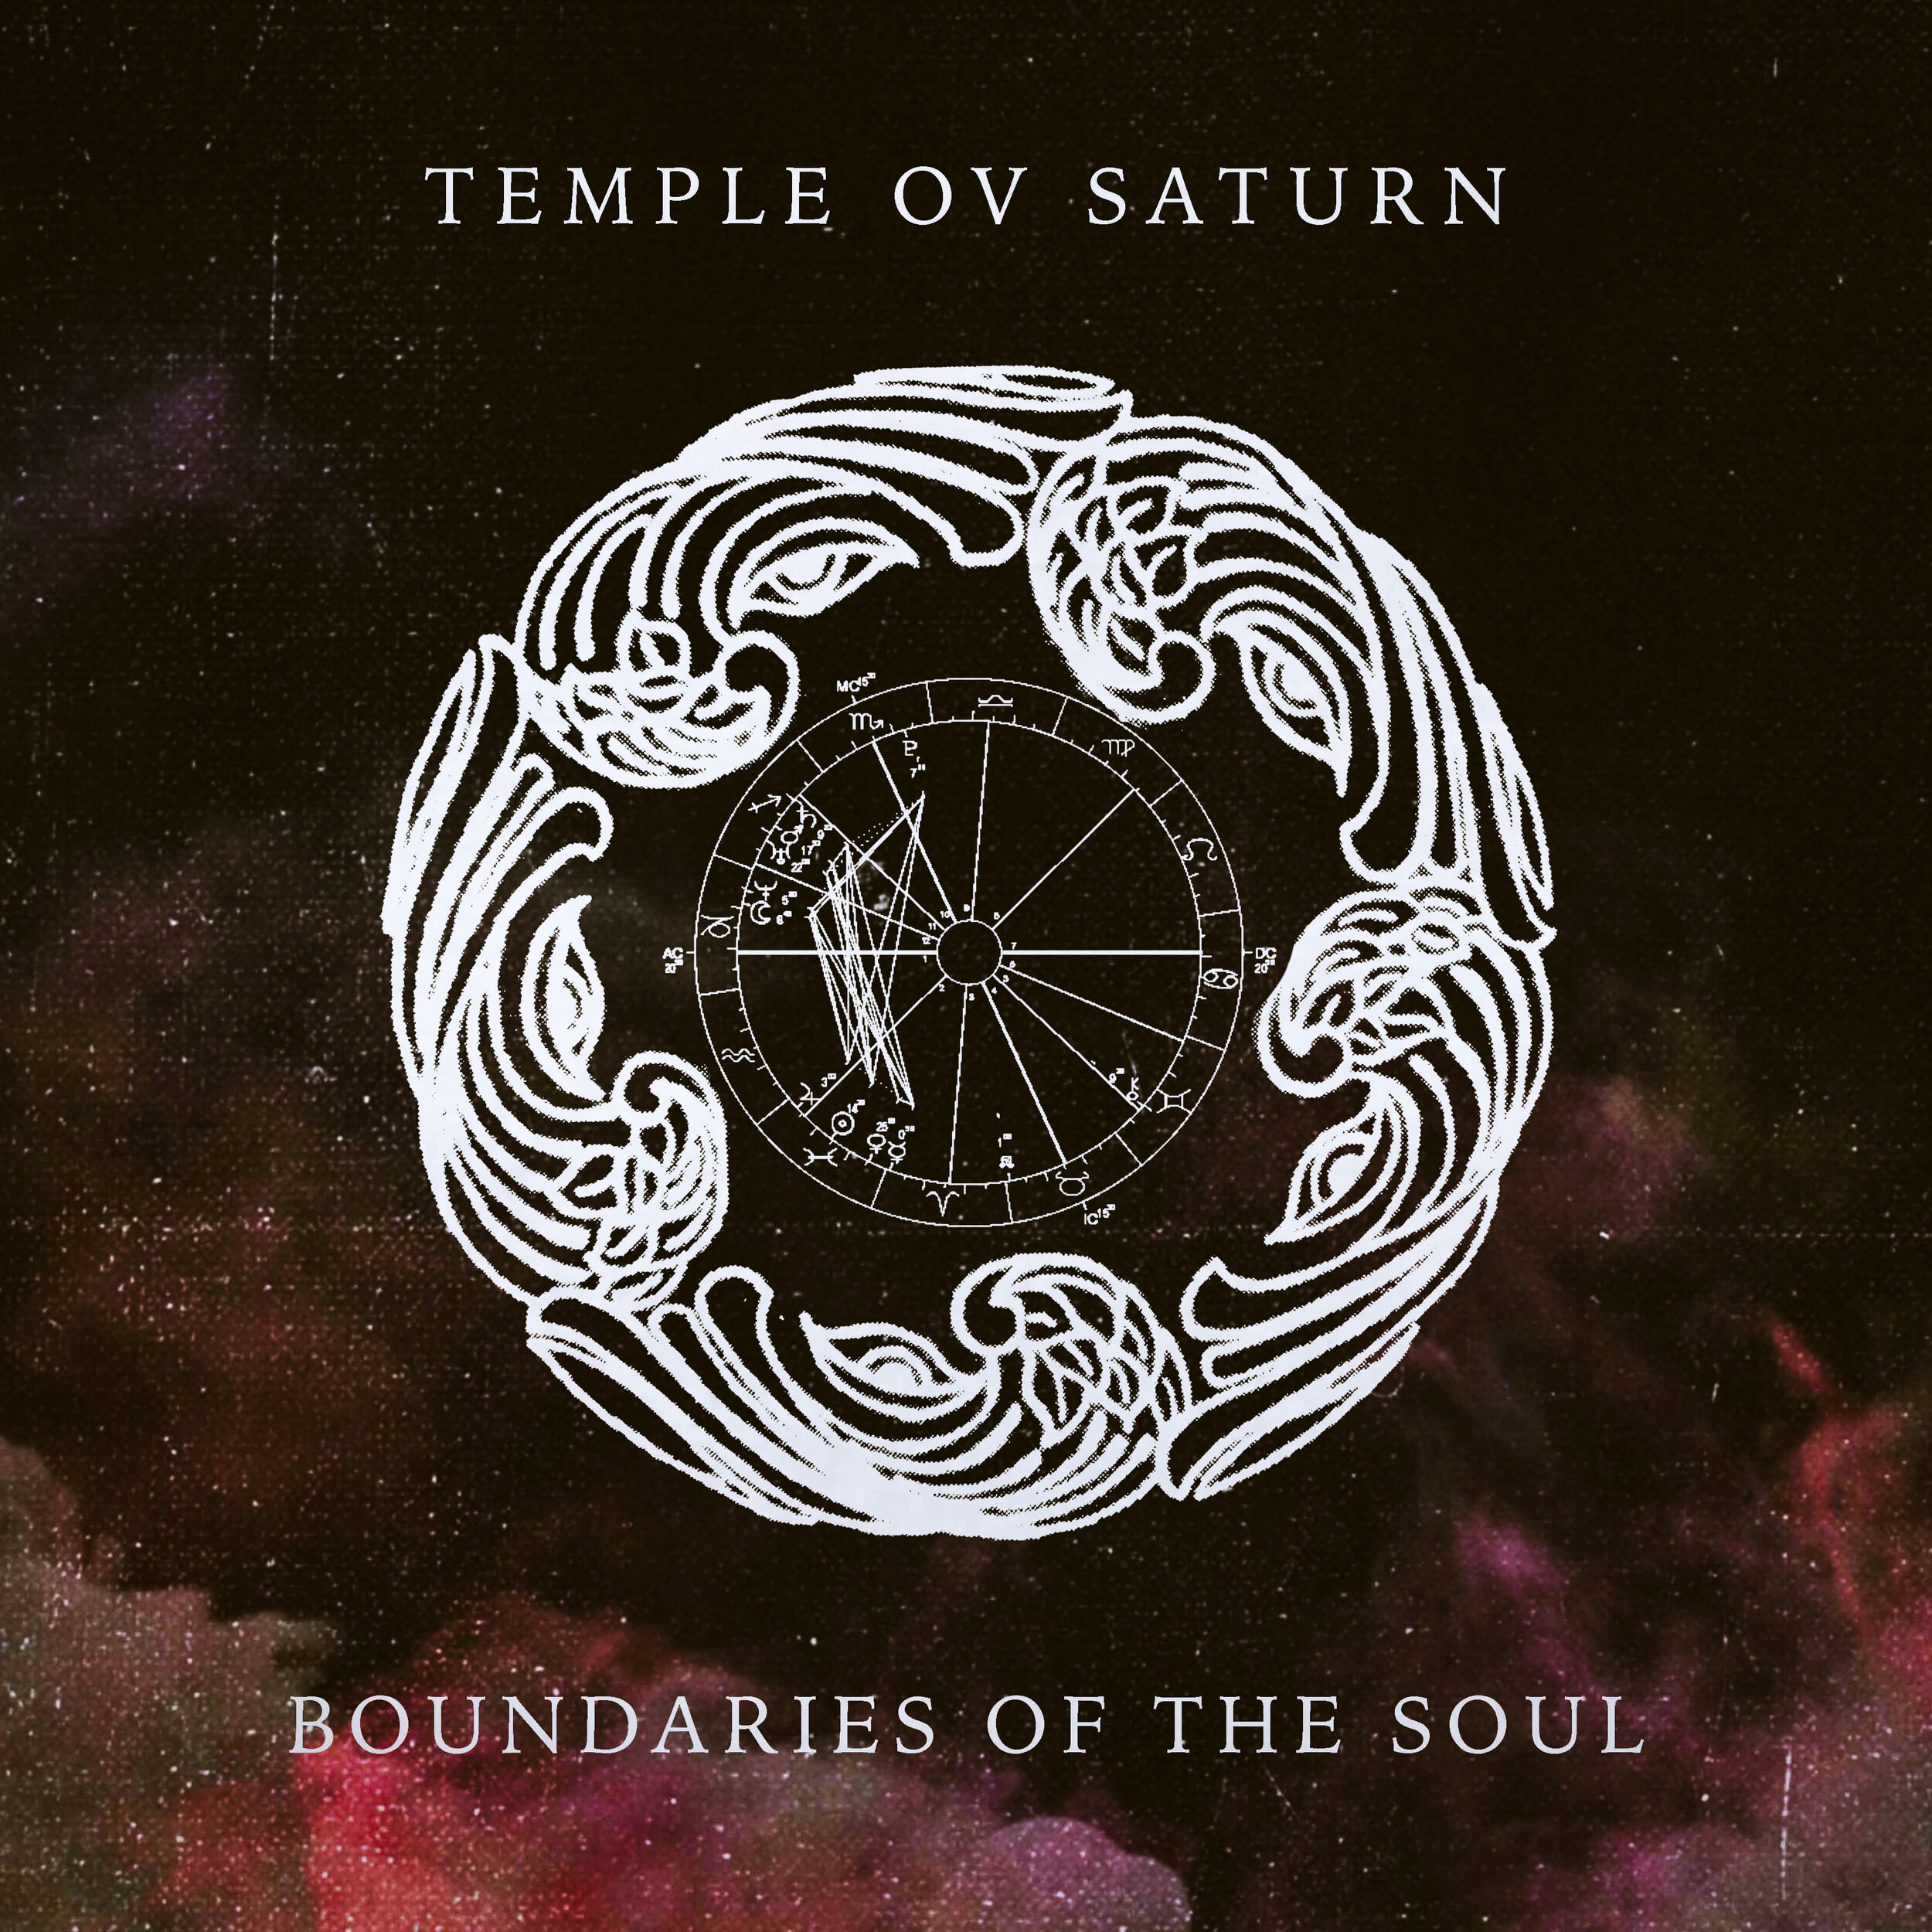 Boundaries of the Soul by Temple ov Saturn